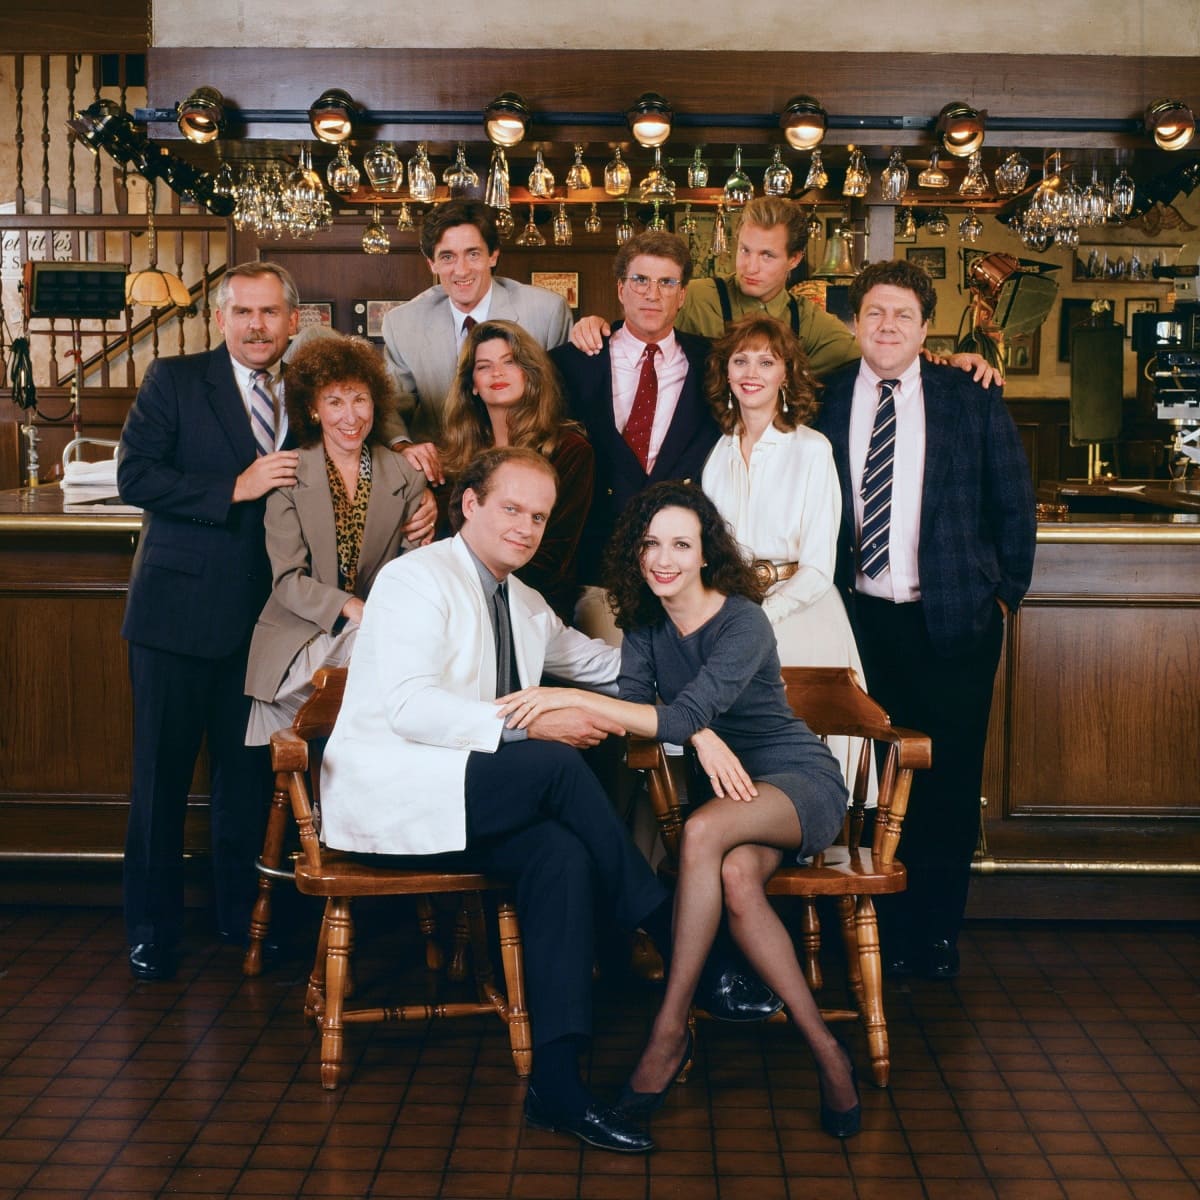 The cast of the popular sitcom television series Cheers, which ran from 1982 to 1993 with a total of 275 half-hour episodes across 11 seasons